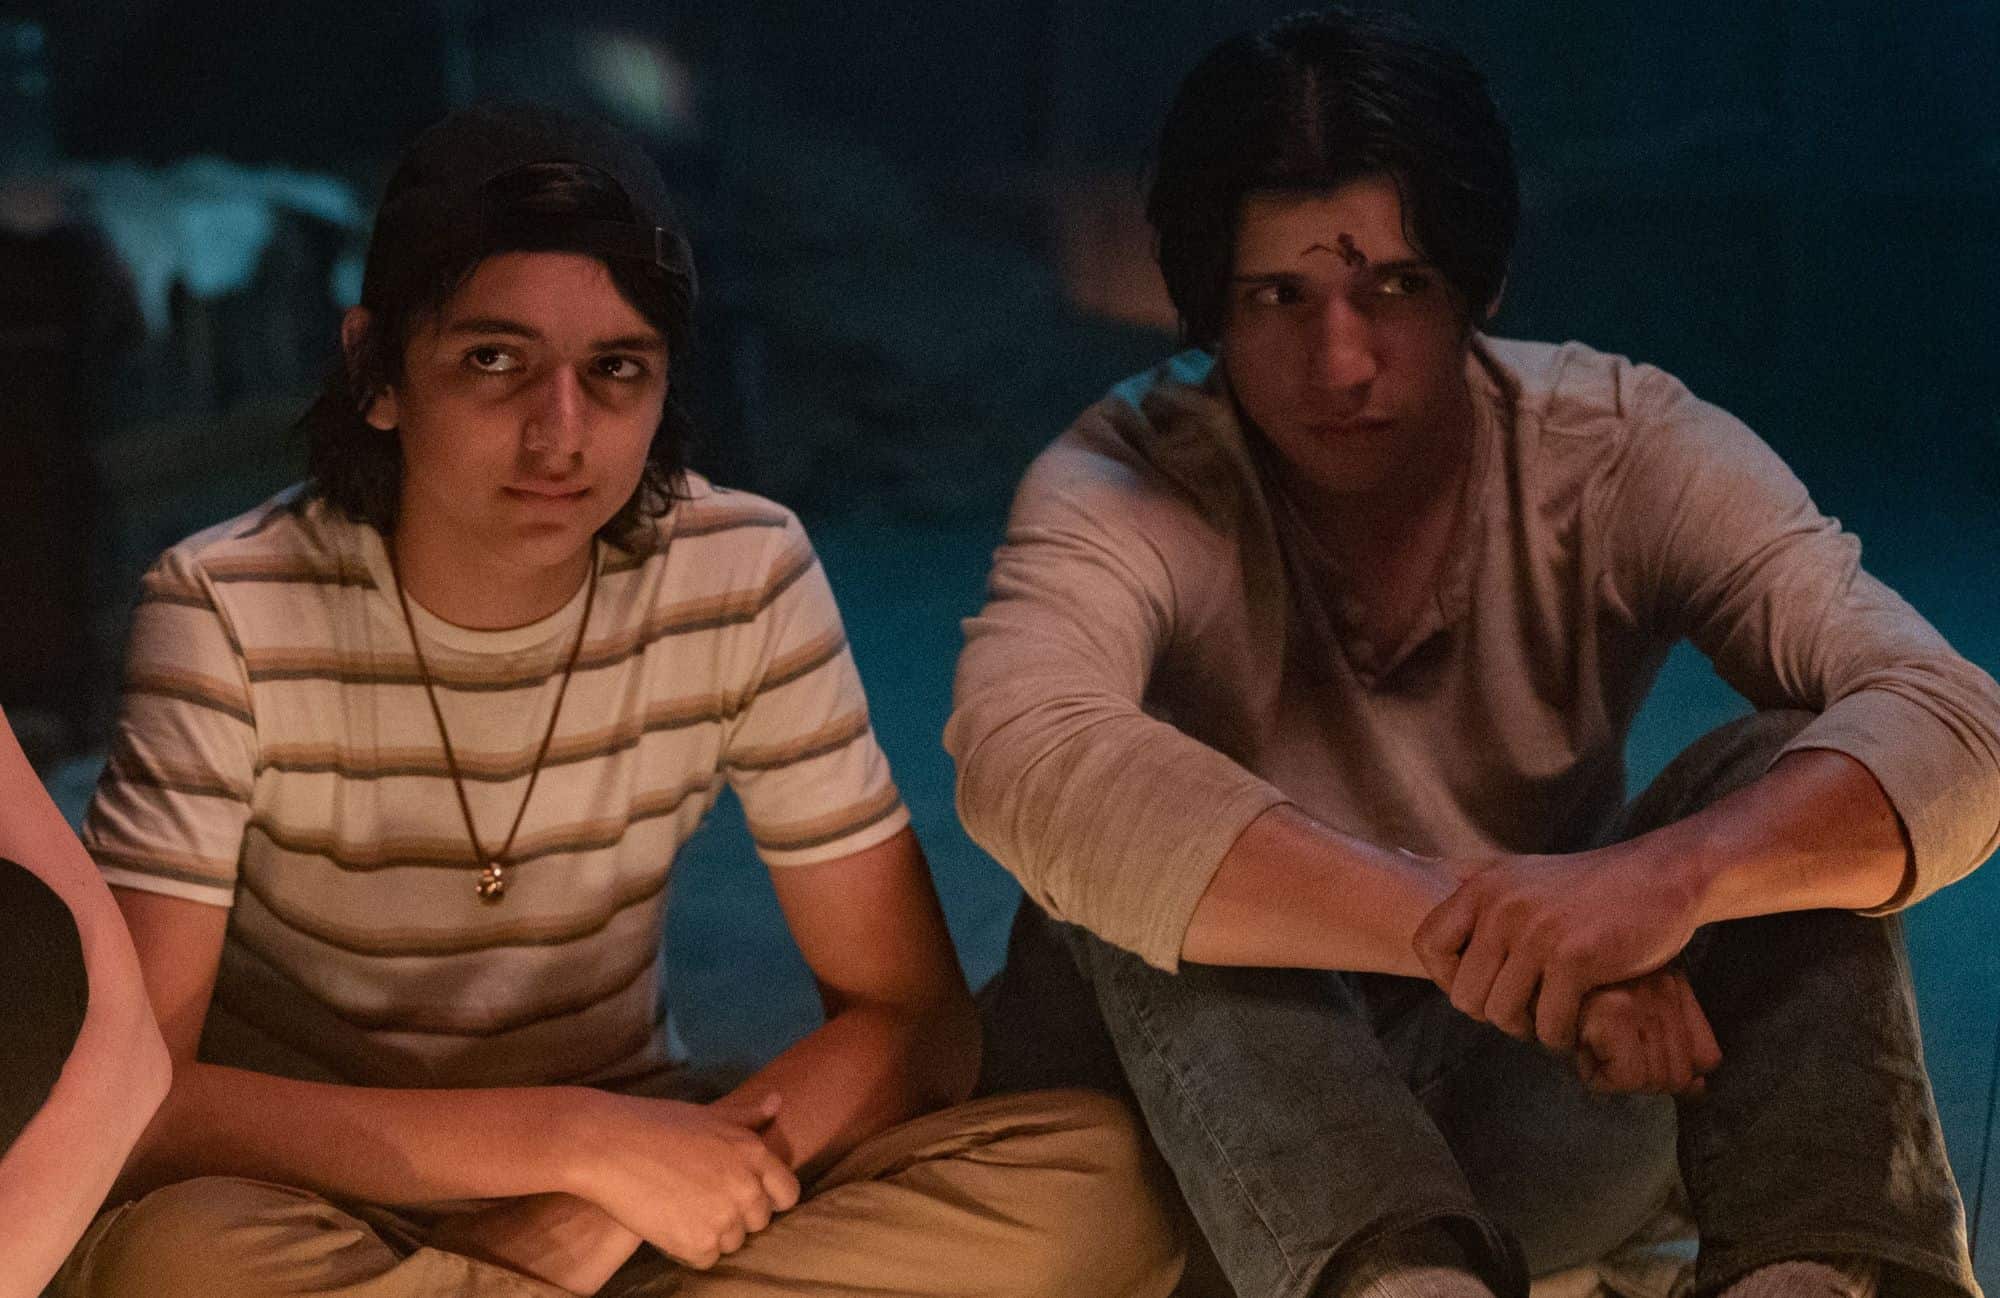 Teenage brothers sit side by side, looking at something offscreen in this photo by Showtime.